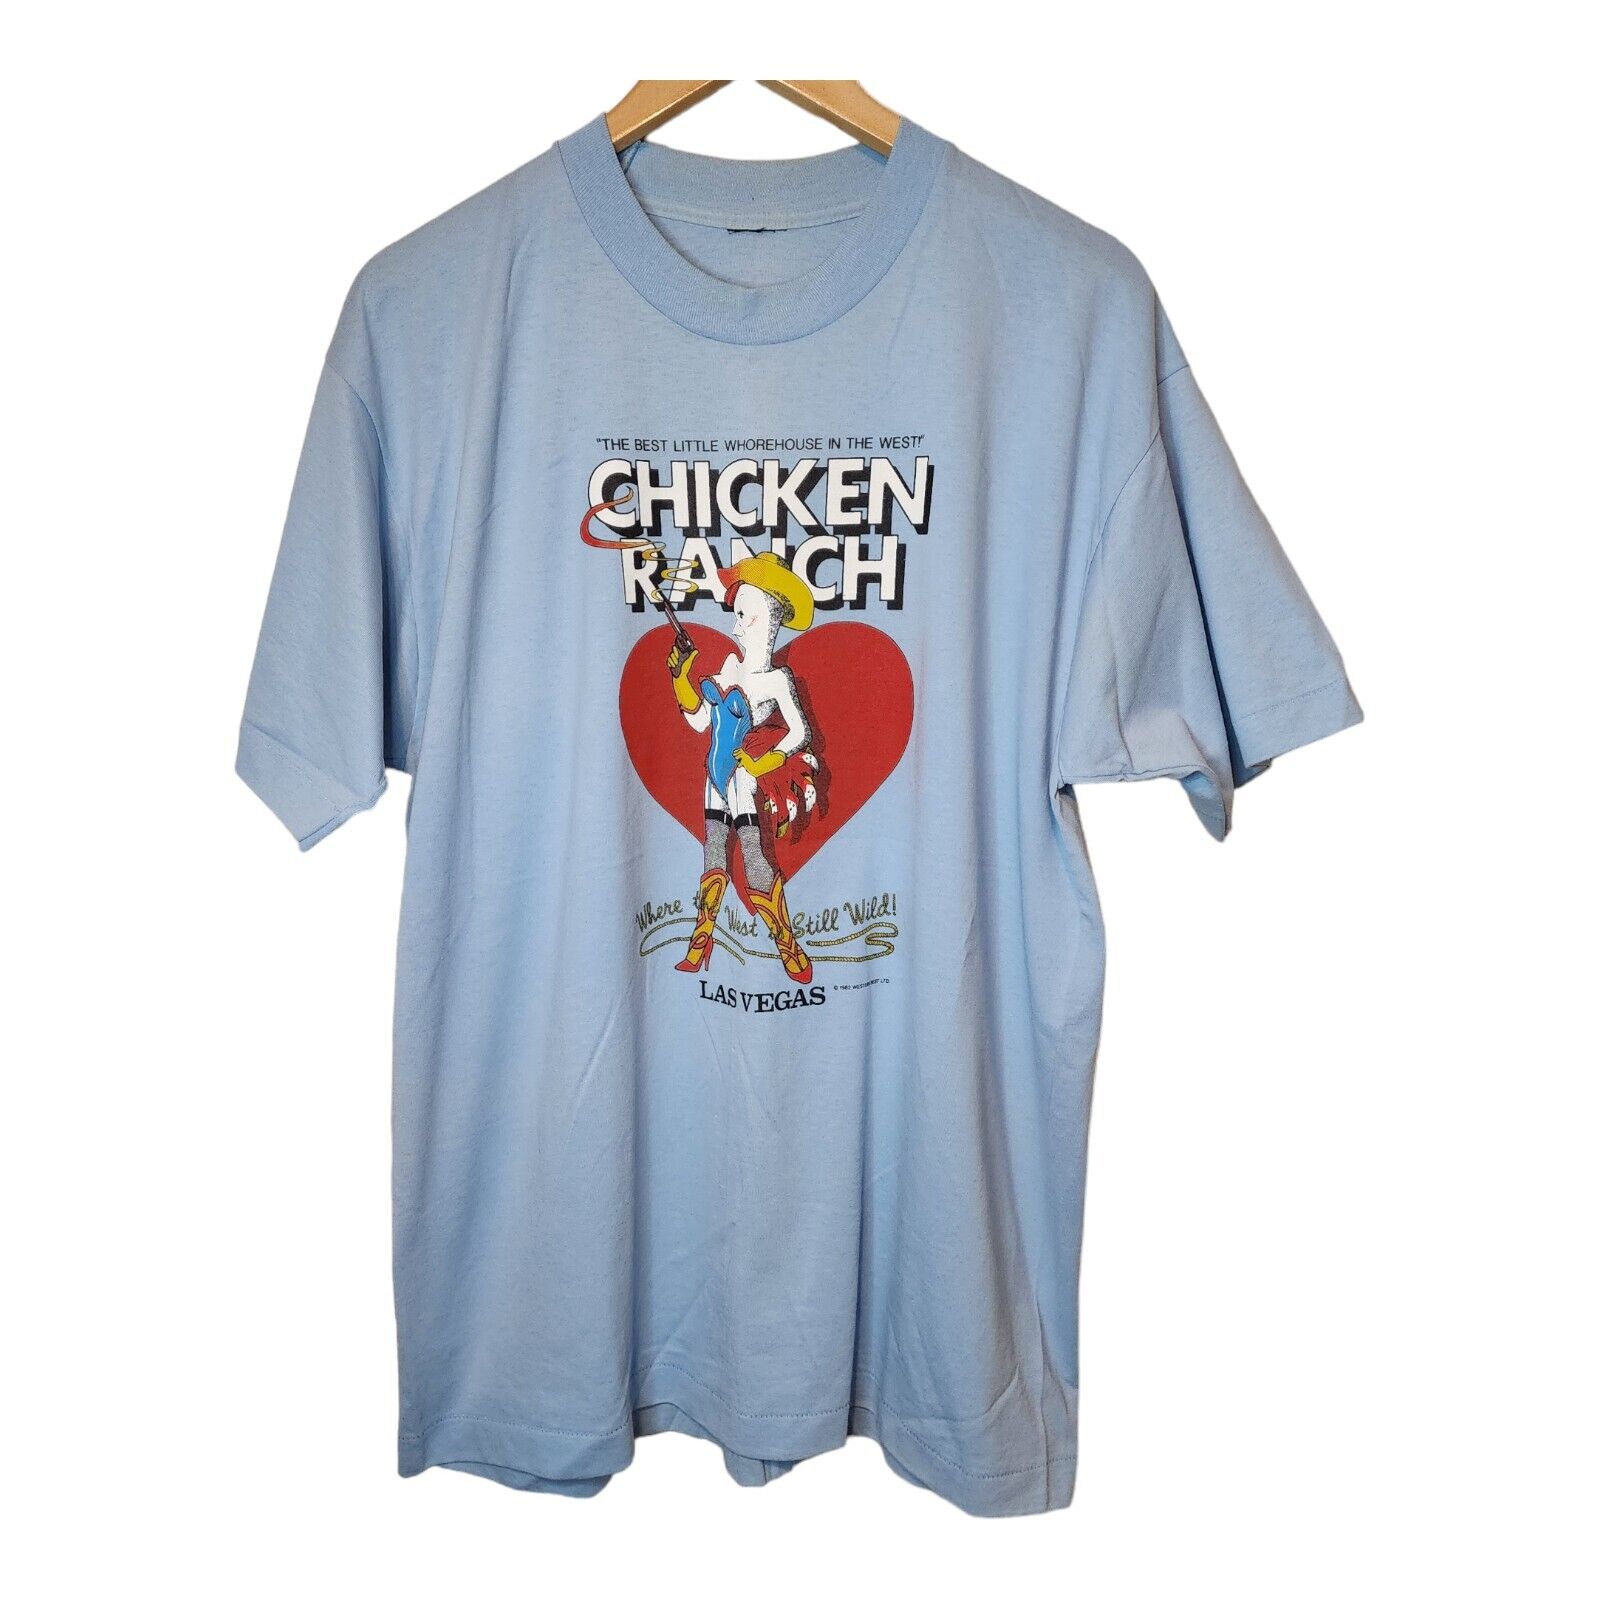 Vintage 80s Chicken Ranch Shirt 1982 Whorehouse Brothel Obscure Las Vegas XL